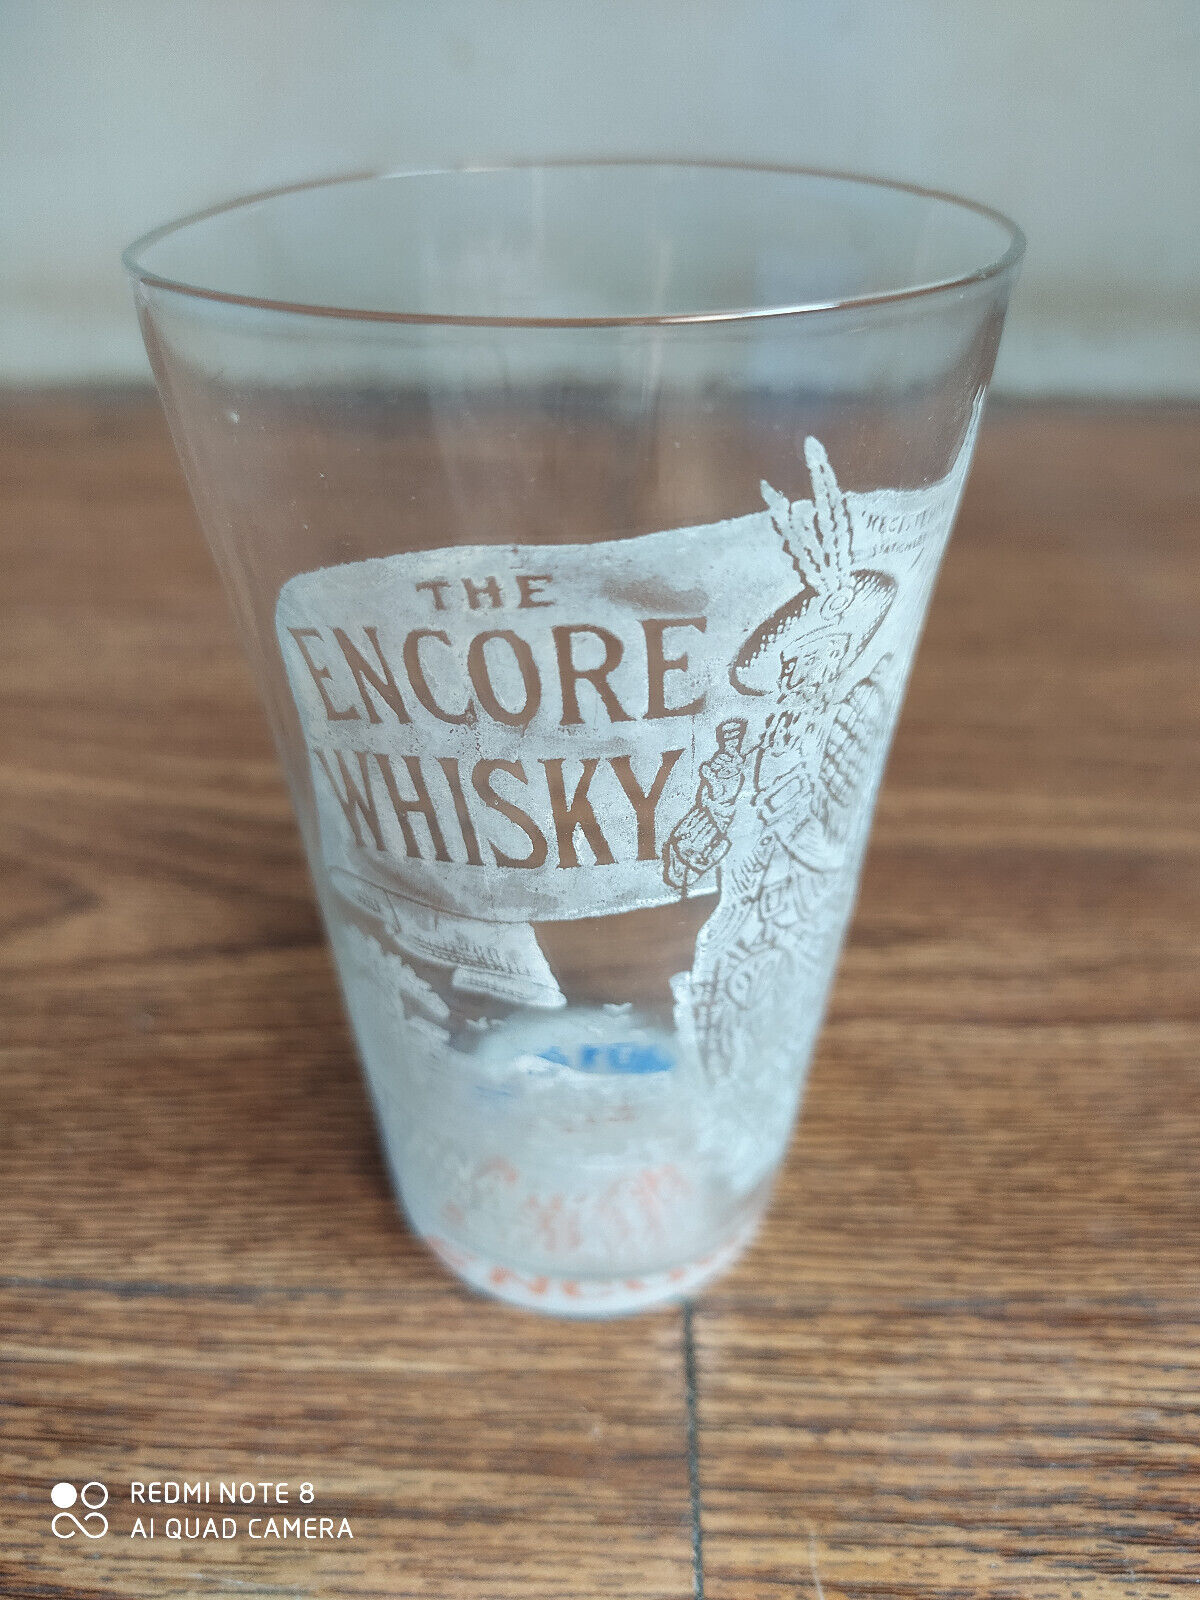 Rare vintage THE ENCORE WHISKY advertising glass of 60\'s made in Scotland.